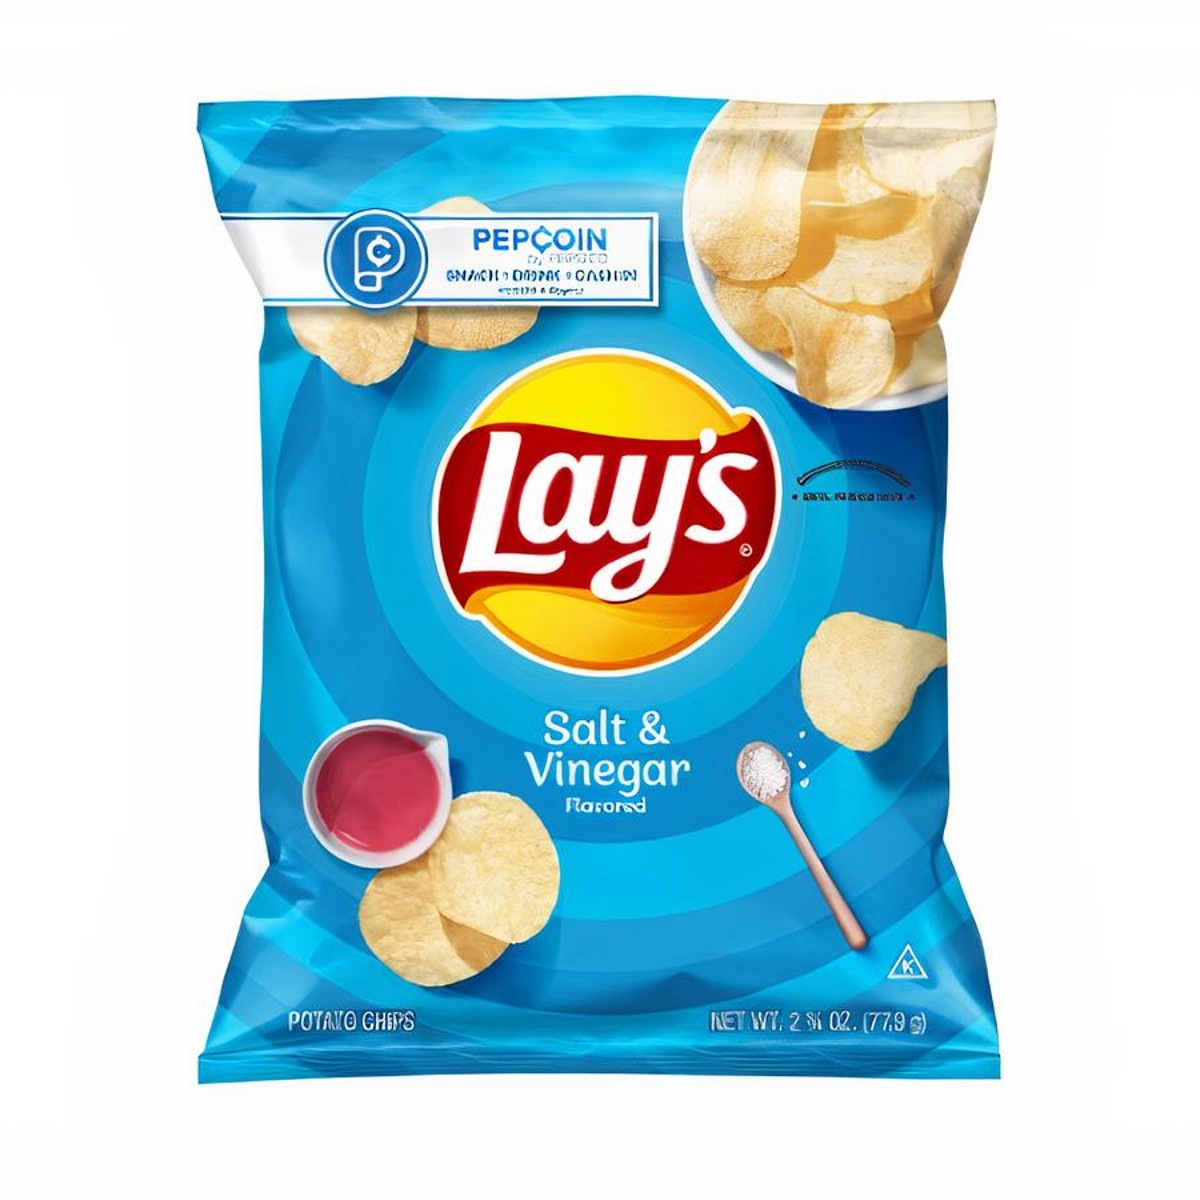 Andy Capps Fries 8 oz. Big Bag: Your Choice and 41 similar items